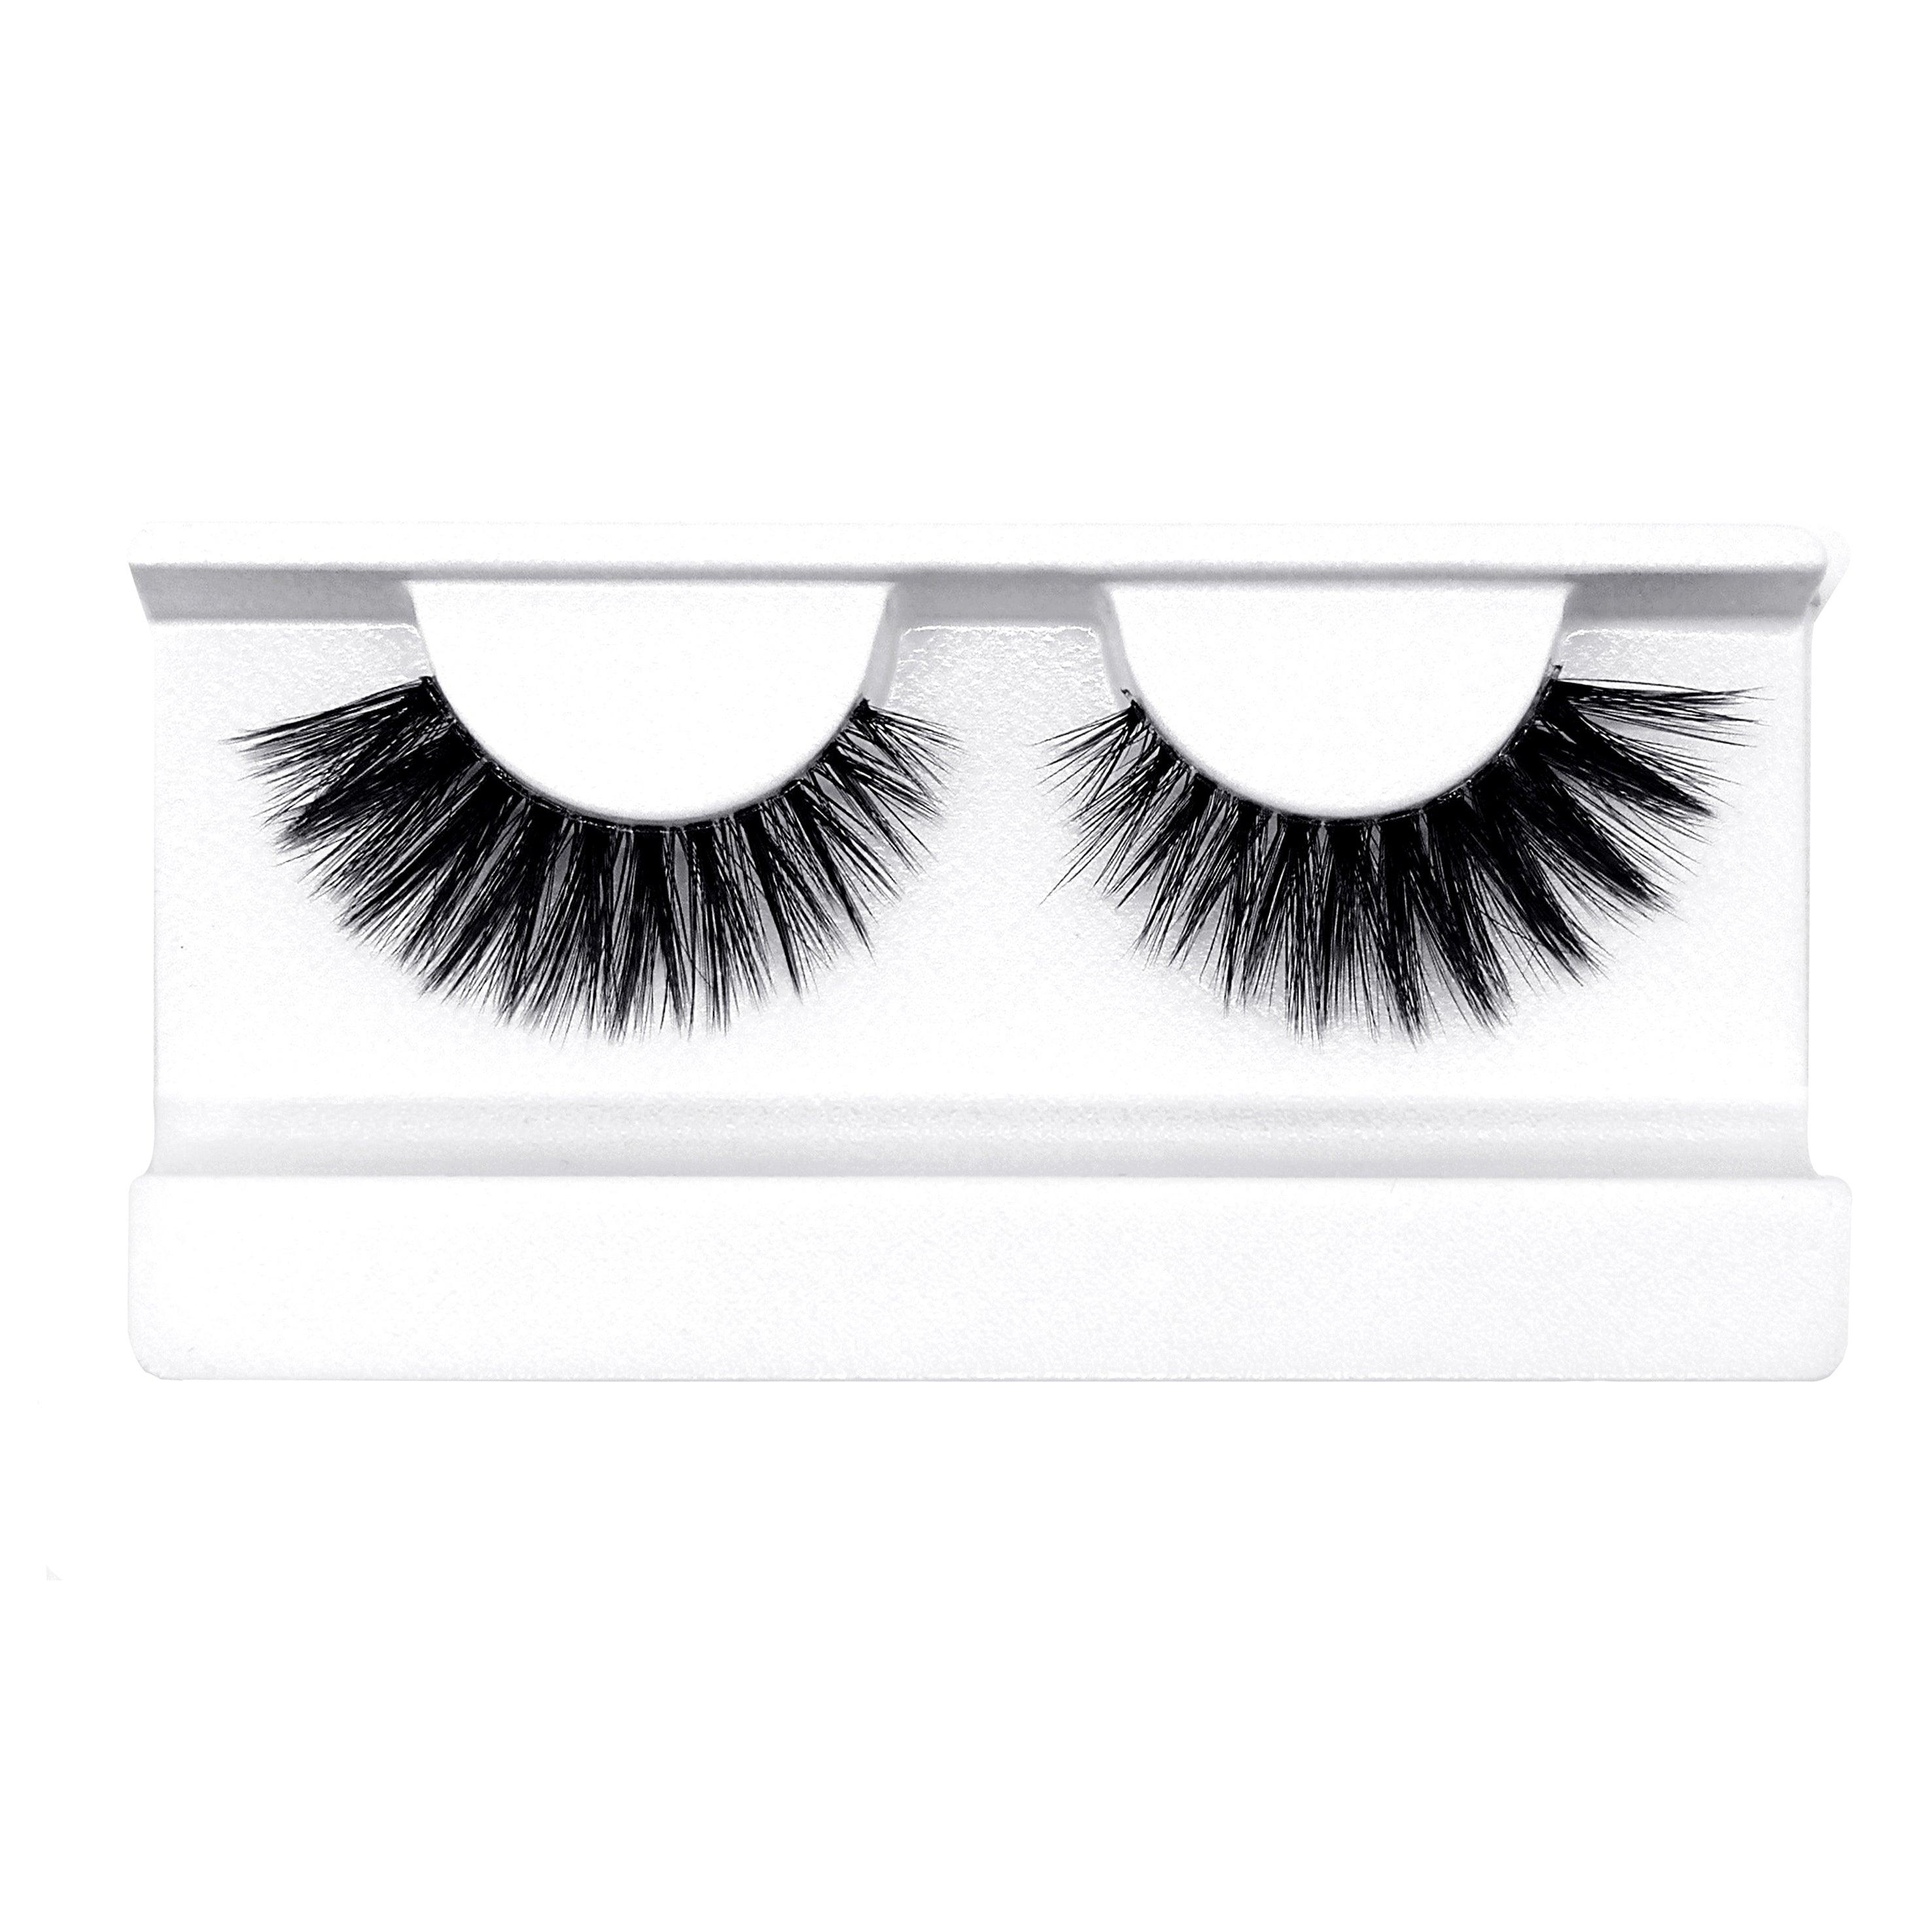 1-Pair Lashes-Lilly Collection #10 (Pack of 12)